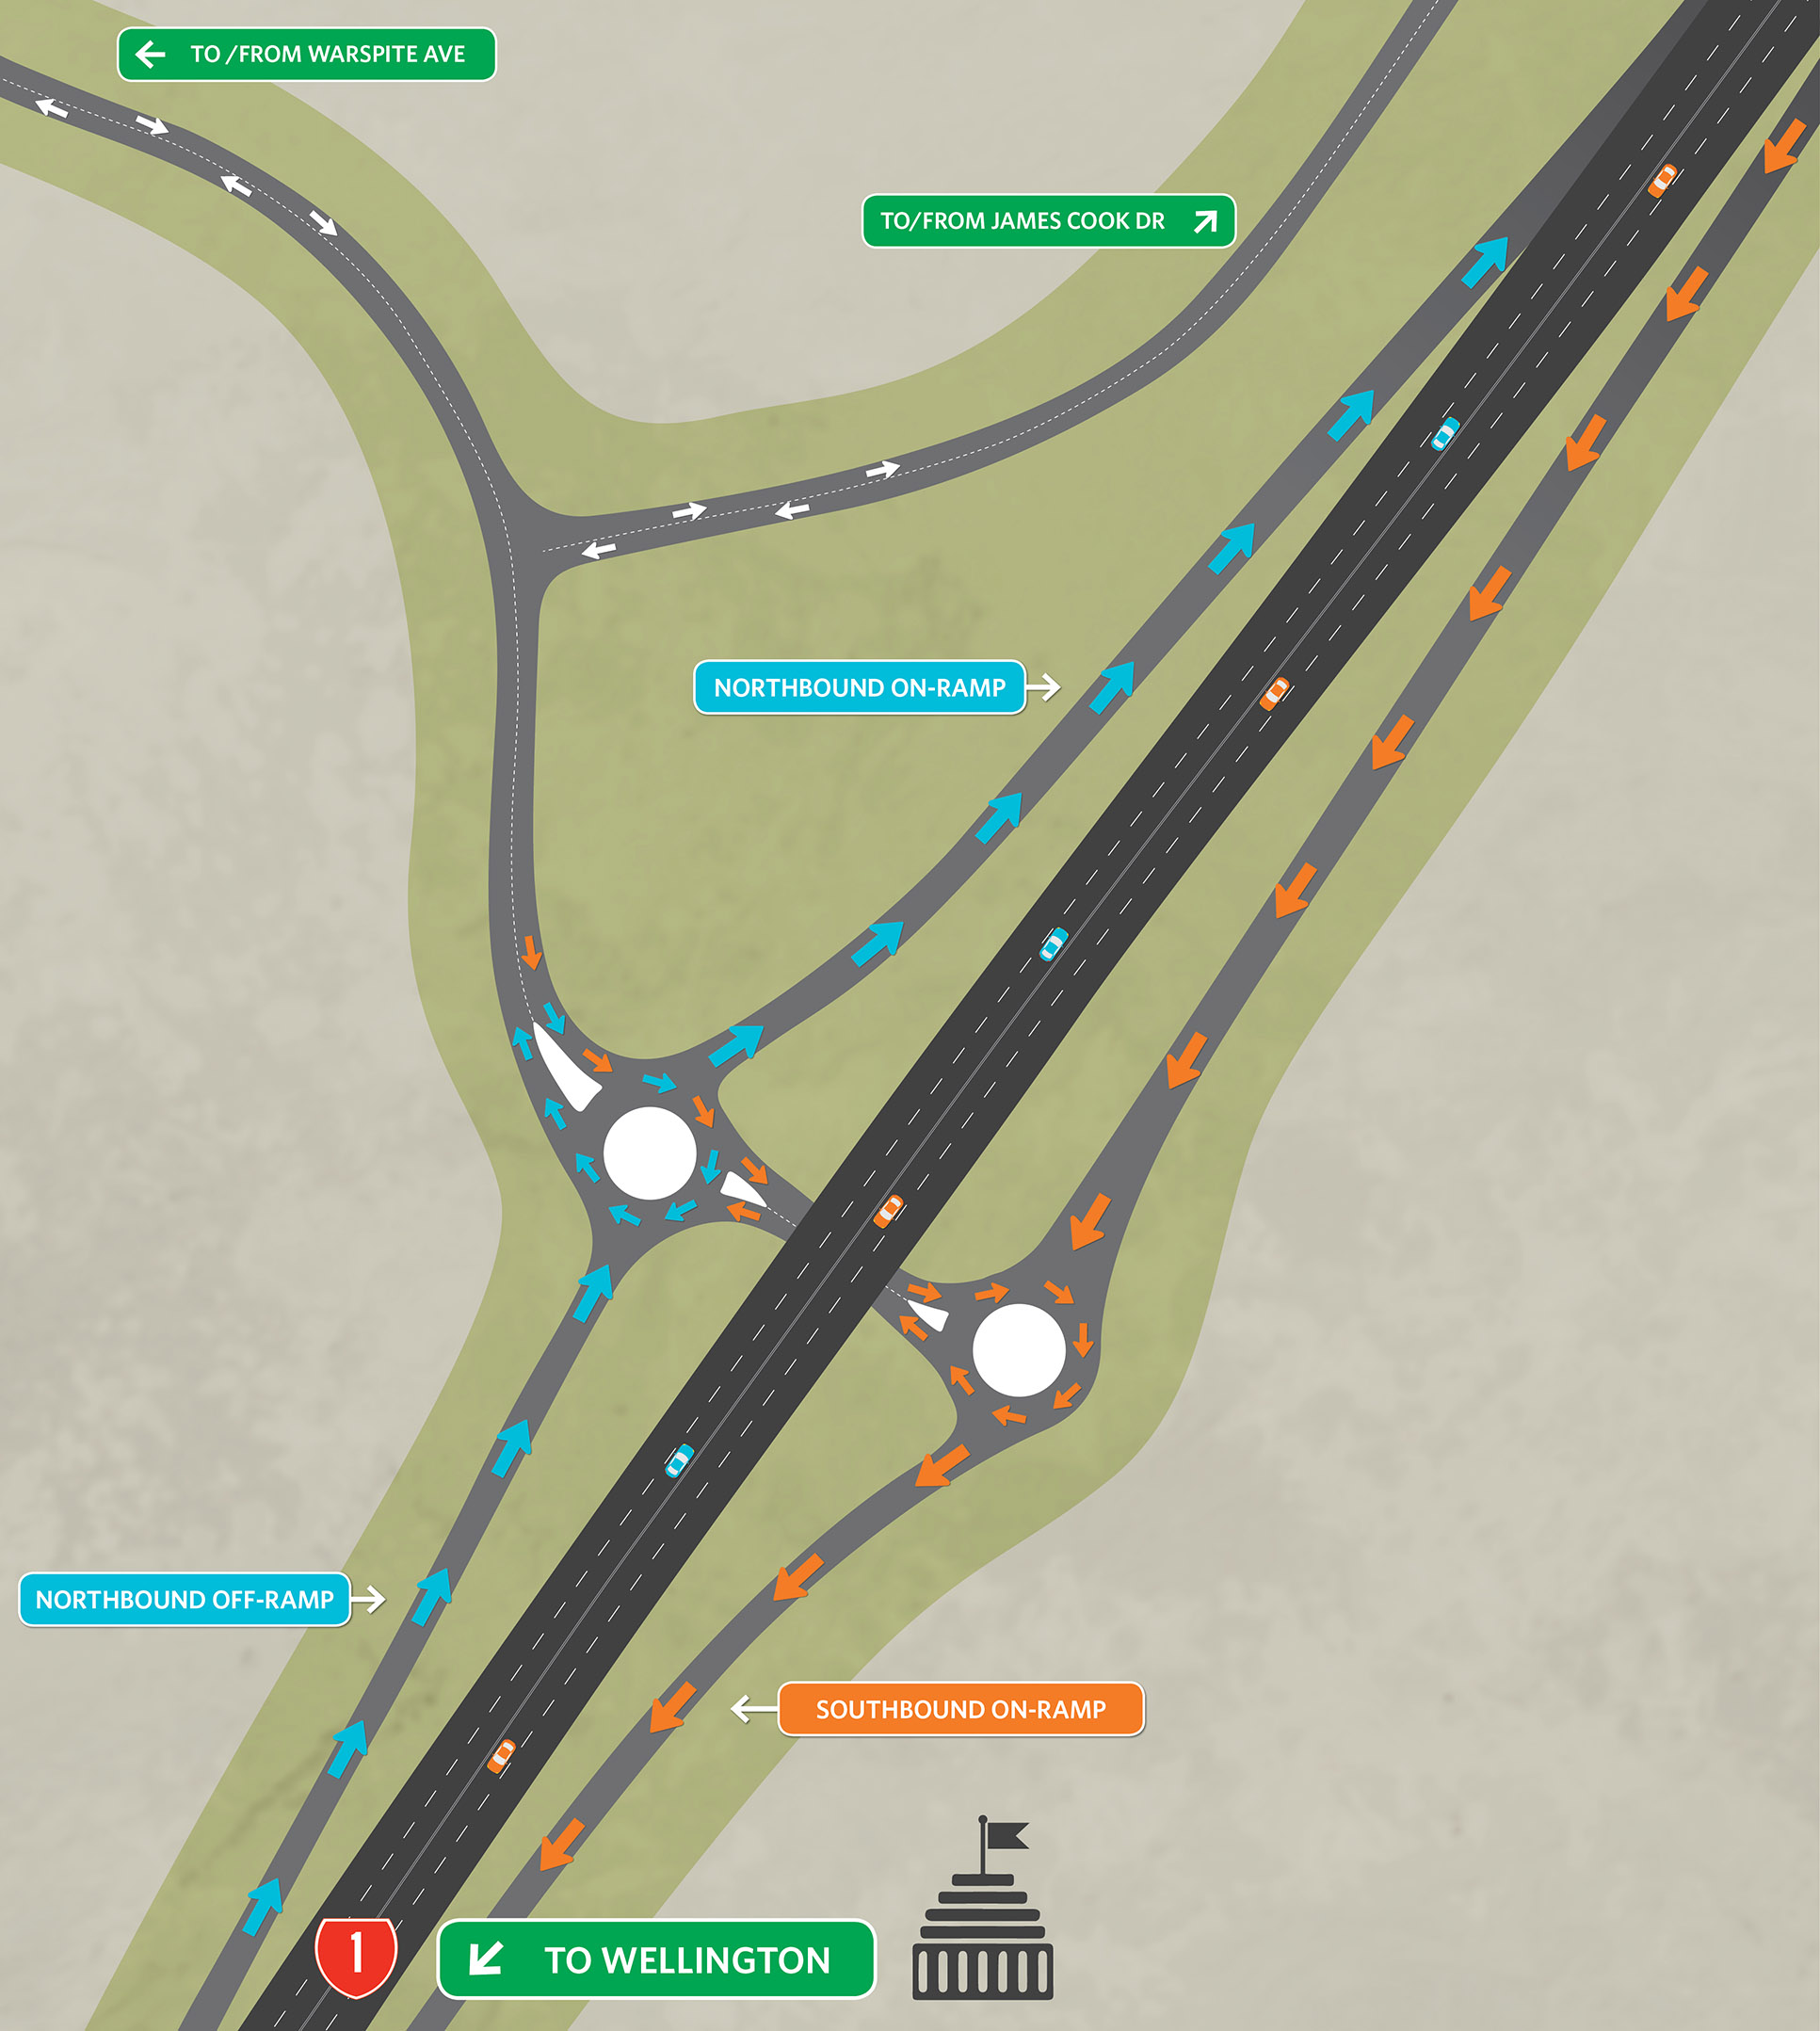 Illustrated map showing the James Cook Interchange map from Warspite Avenue in Waitangirua.